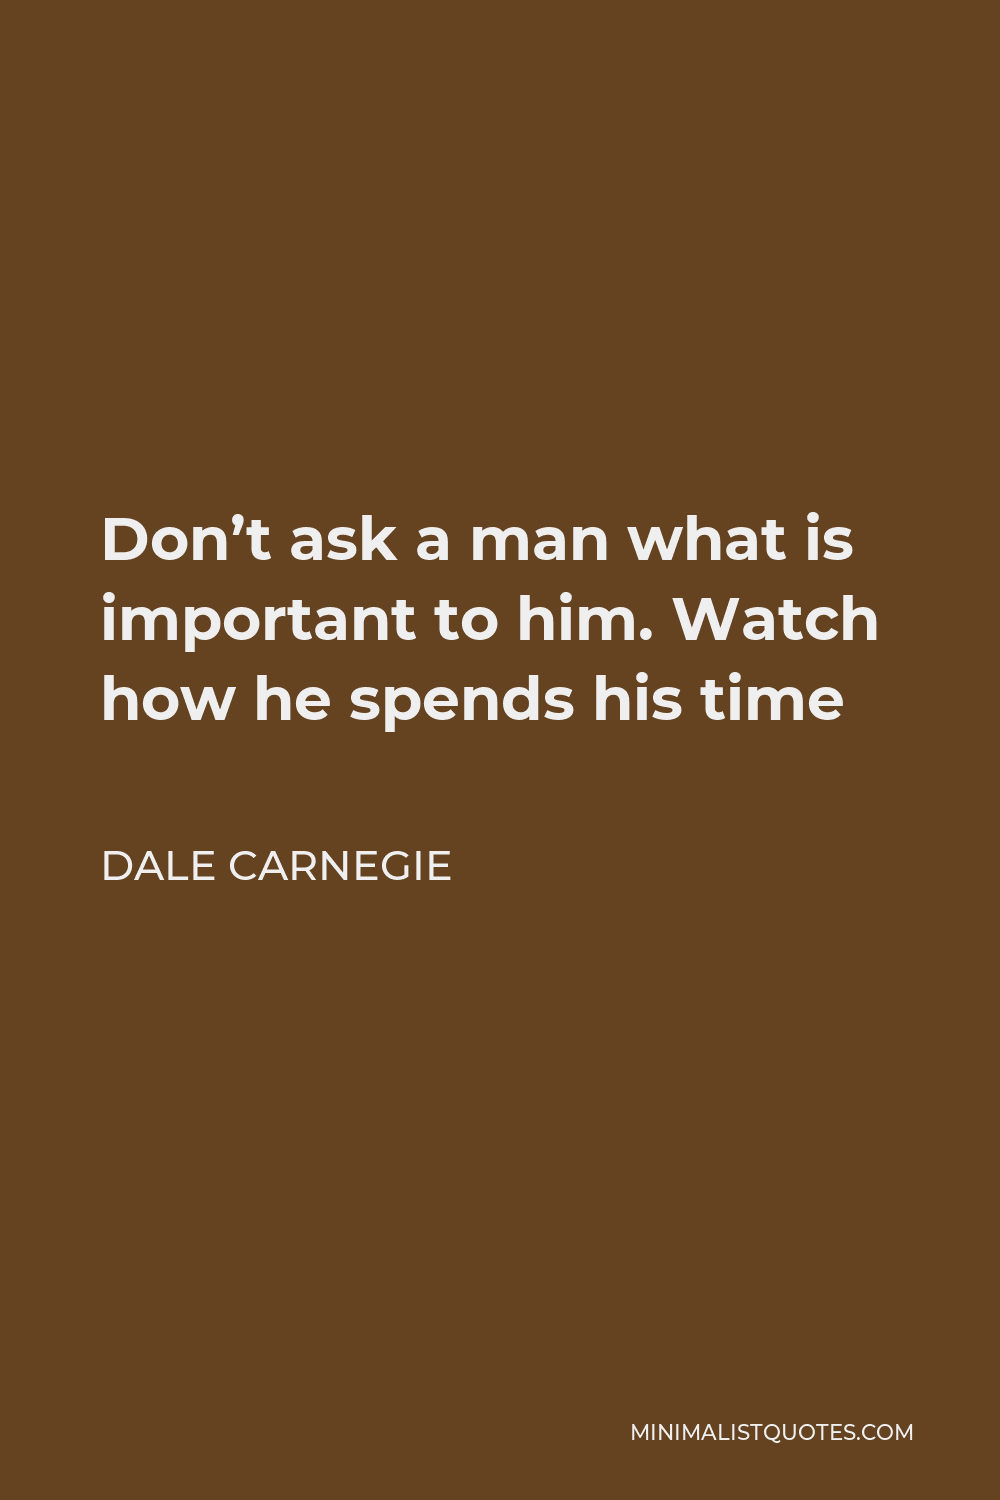 Dale Carnegie Quote - Don’t ask a man what is important to him. Watch how he spends his time